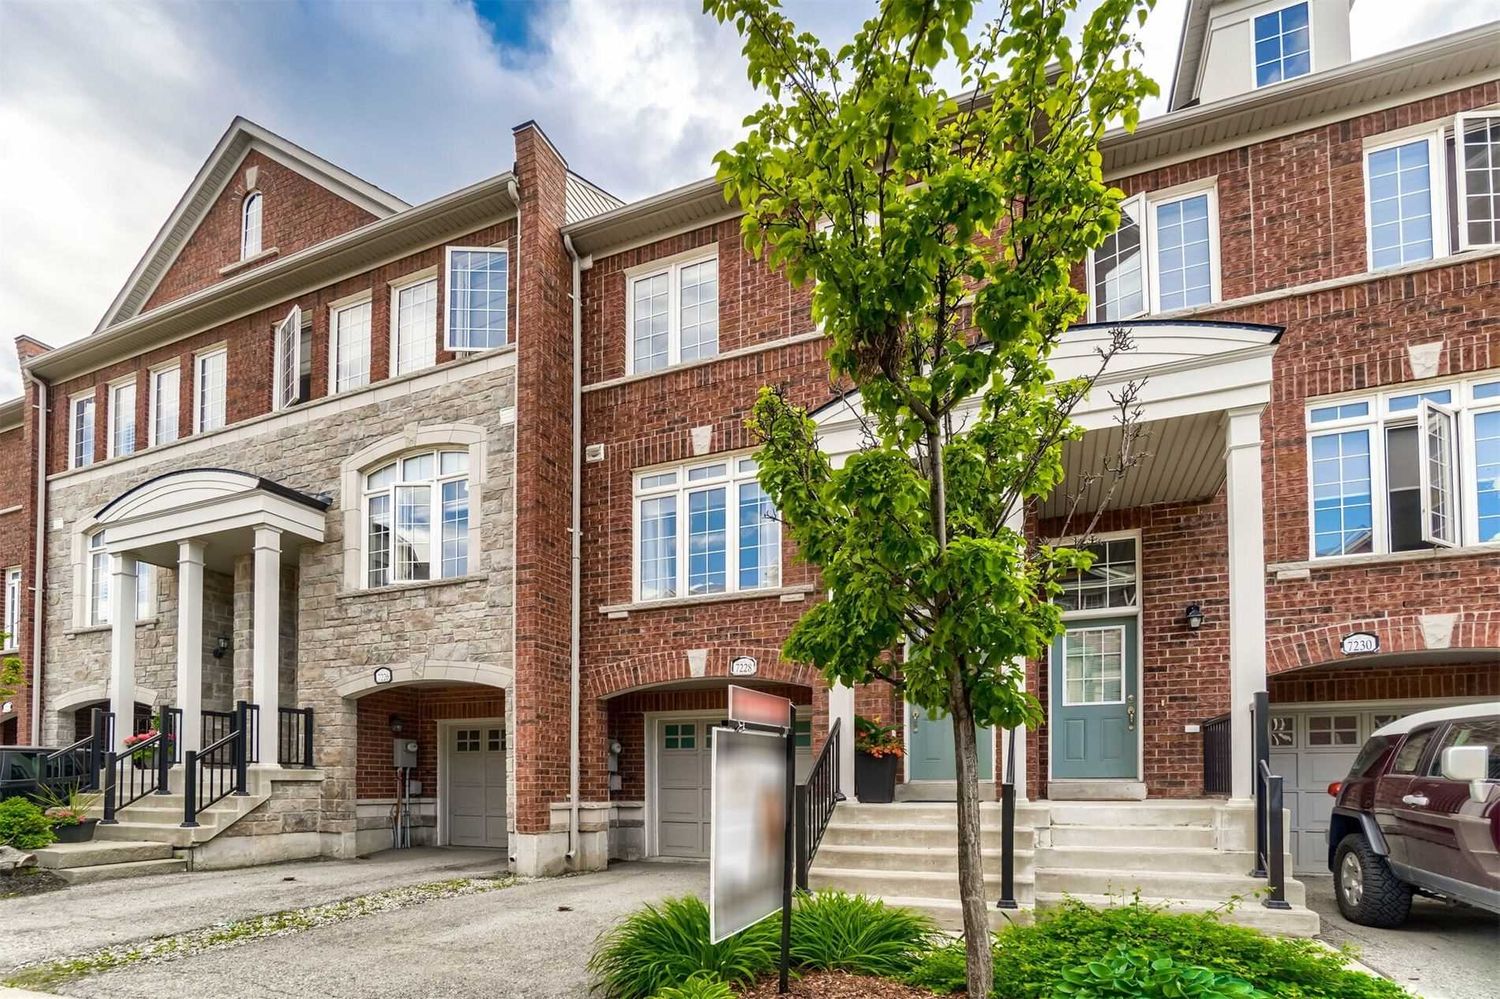 7172 Triumph Lane. 7172 Triumph Lane Townhomes is located in  Mississauga, Toronto - image #1 of 2